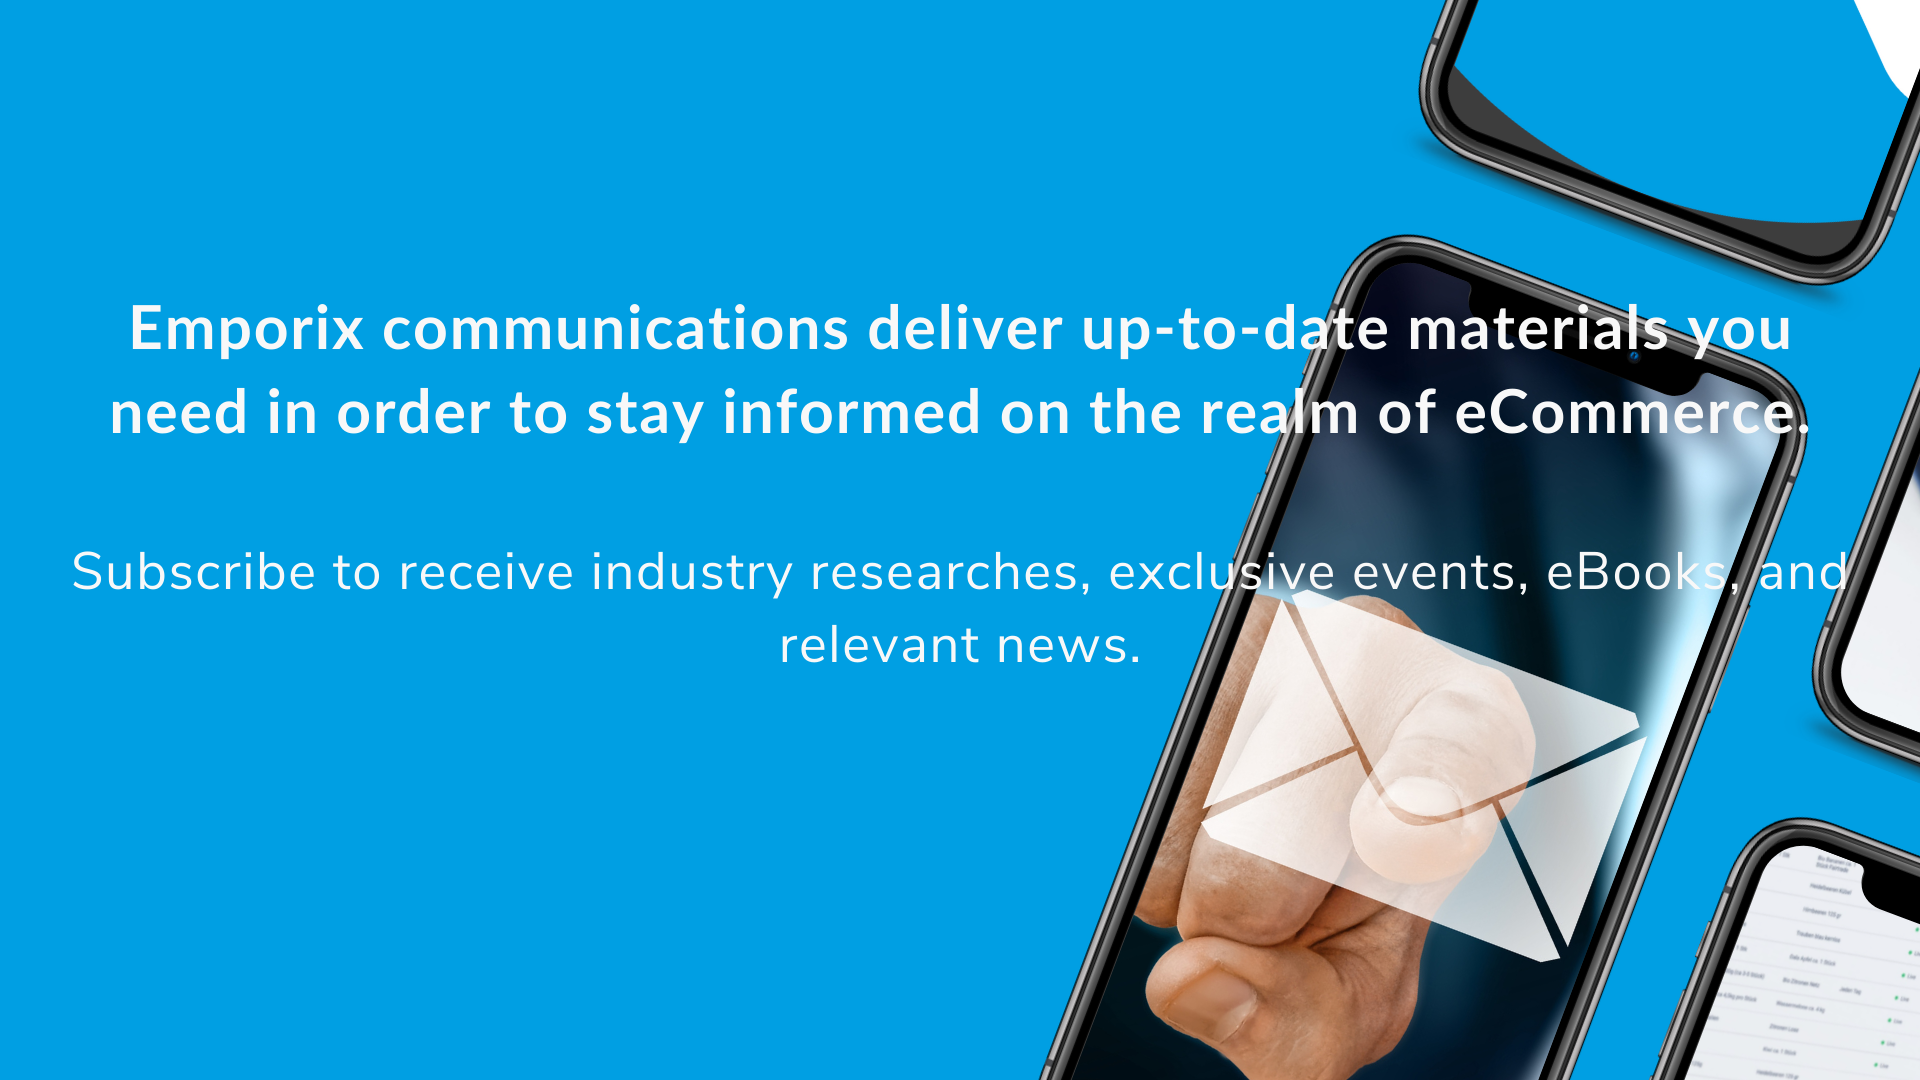 Emporix communications deliver up-to-date materials you need in order to stay informed on the realm of eCommerce. Subscribe to receive industry resear